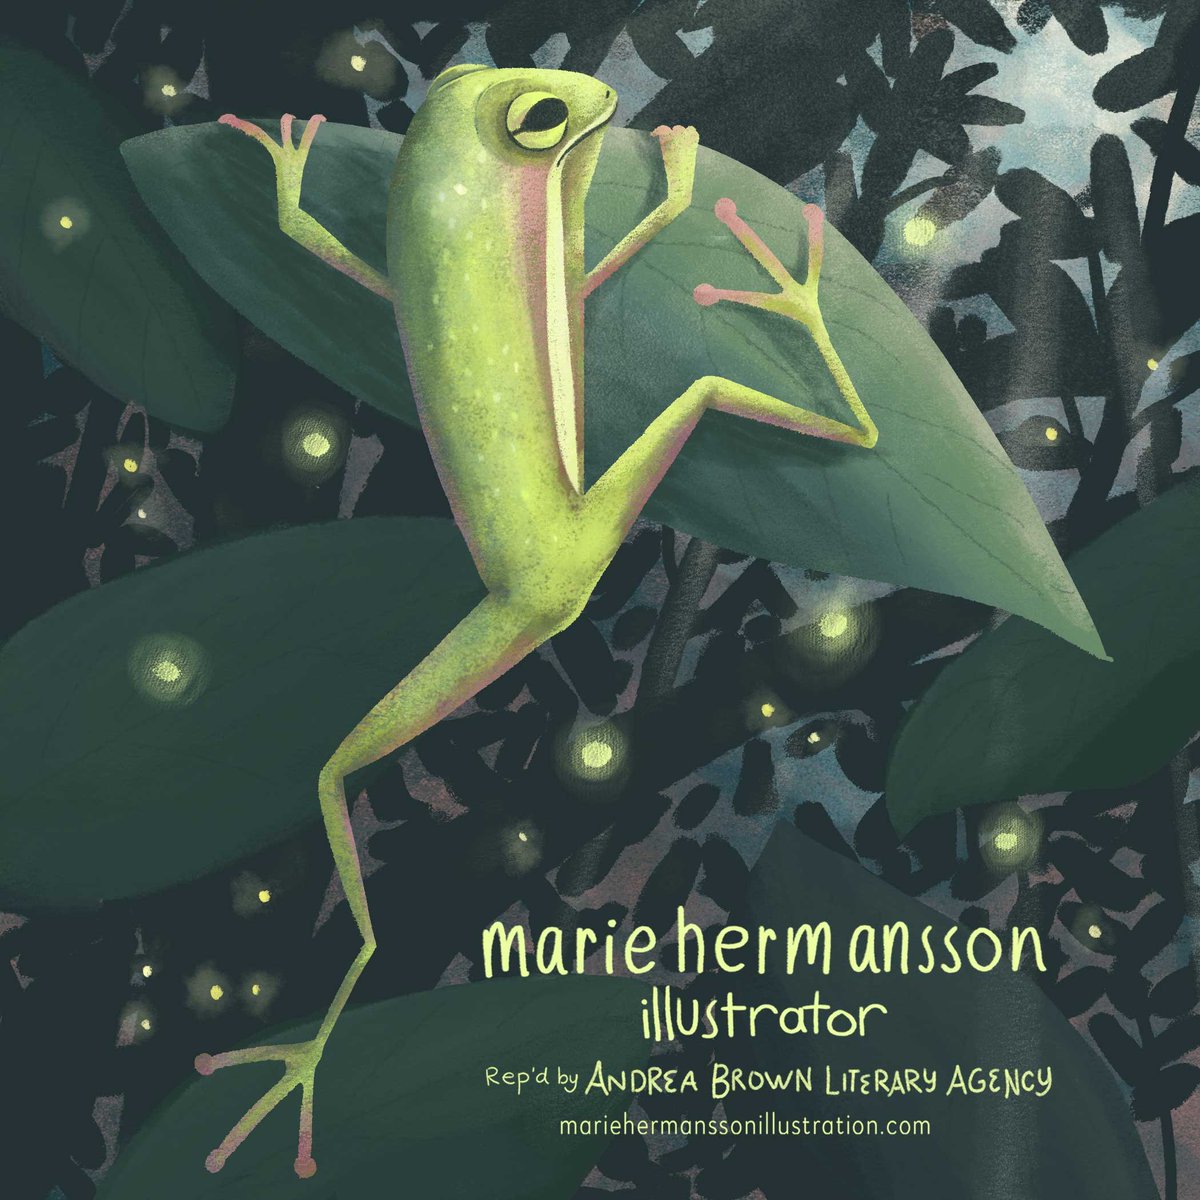 Hi #KidLitArtPostcard & #KidLit community! I'm an illustrator of picture books. The goal with every illustration I create is to engage children's imagination and sense of wonder 🩵 Nonfiction or fiction stories. 🐸 MarieHermanssonIllustration.com Rep'd by: @CarynWiseman @AndreaBrownLit